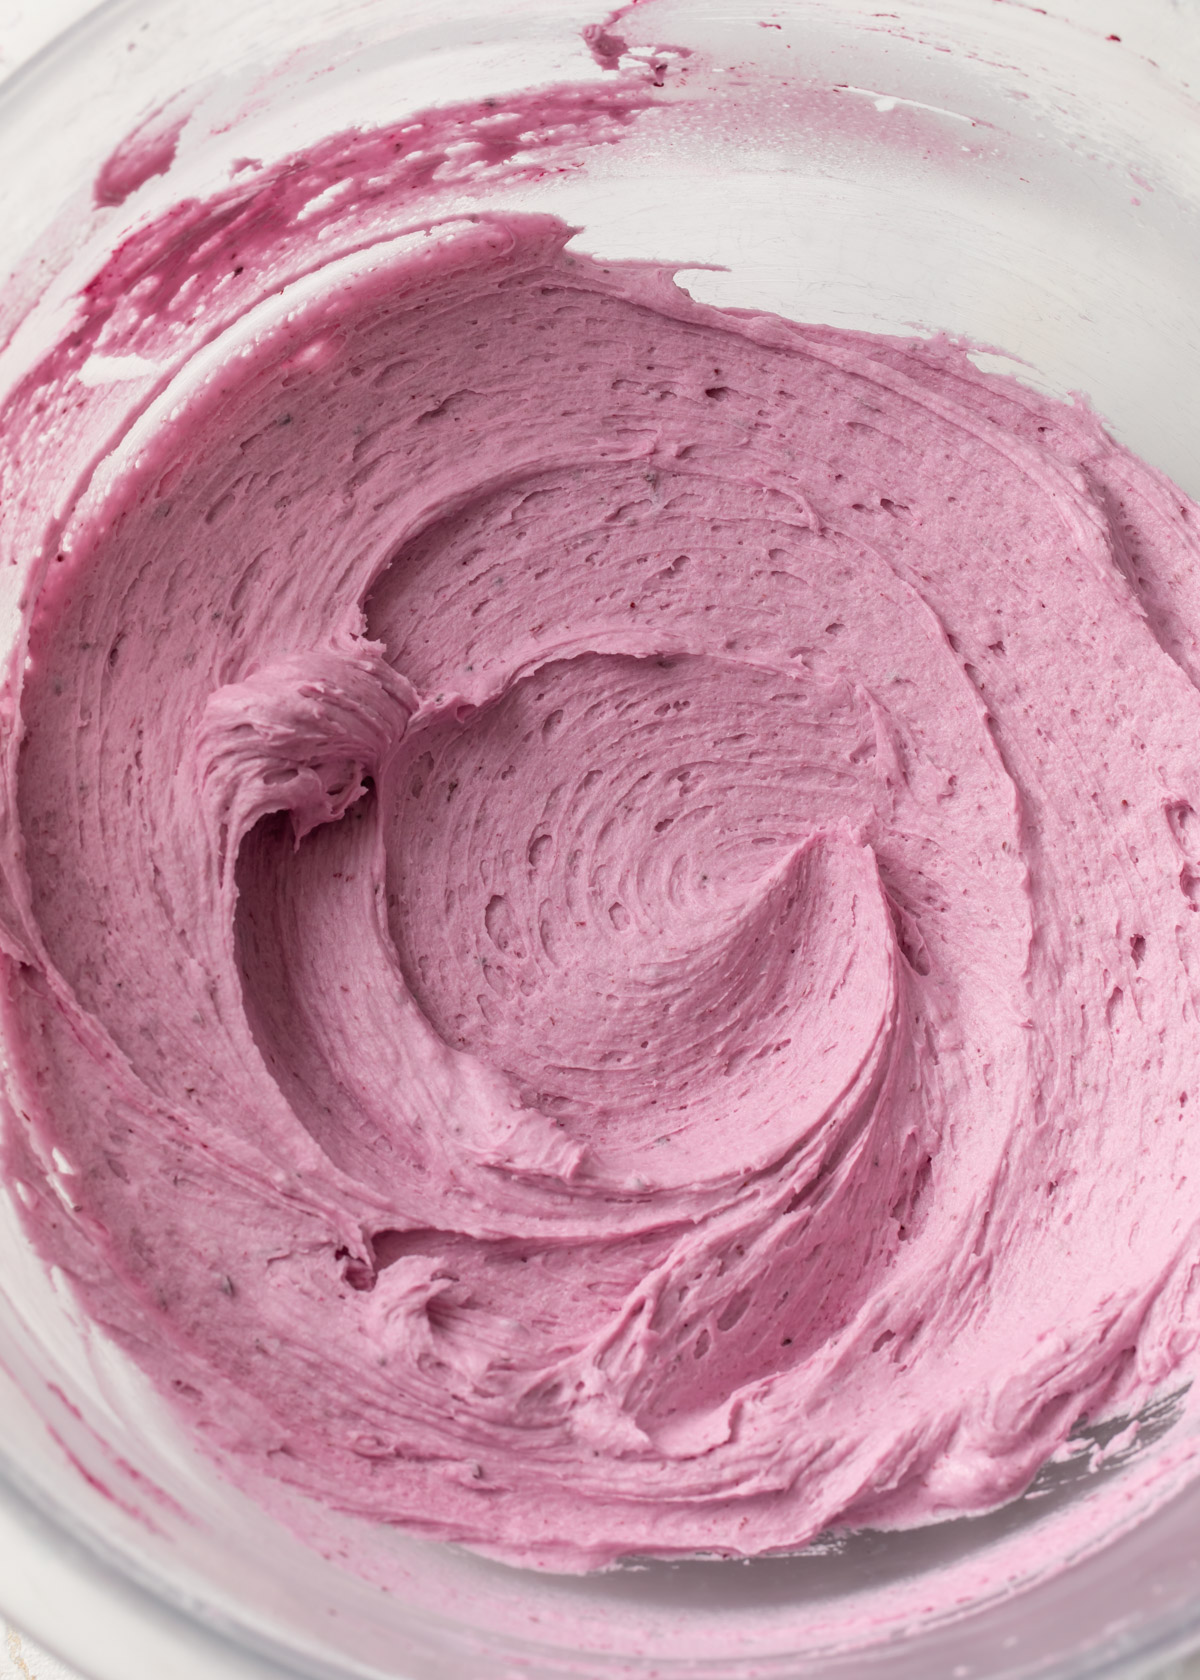 A bowl of bright, fluffy blueberry buttercream frosting